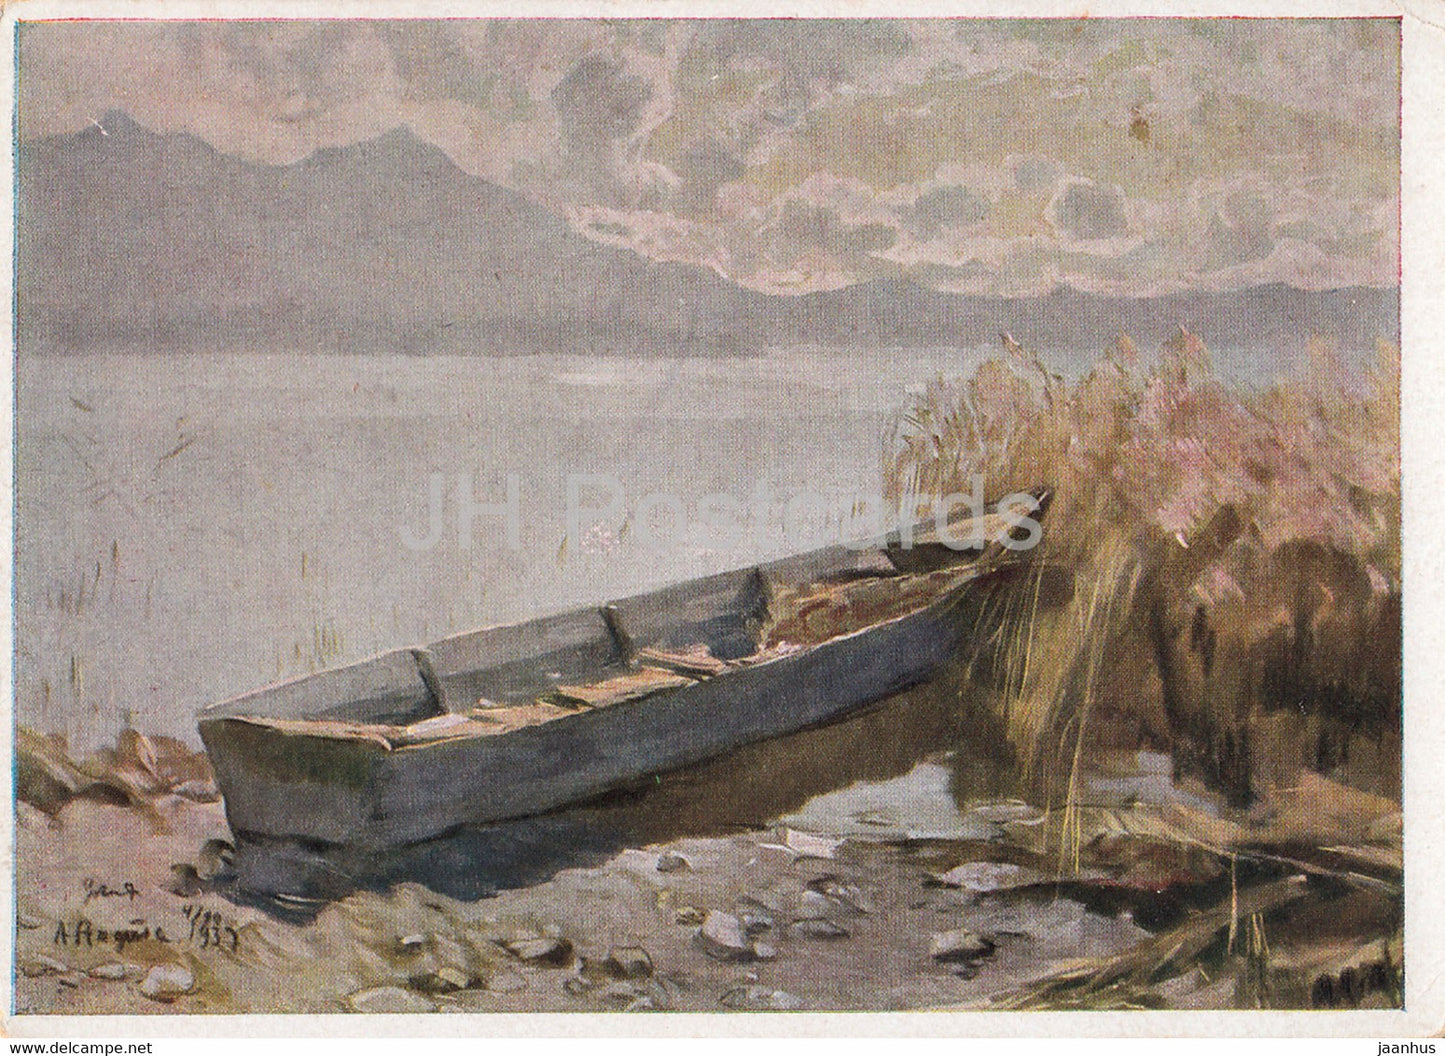 painting by Albert Stagura - Am Chiemsee - boat - German art - Germany - used - JH Postcards